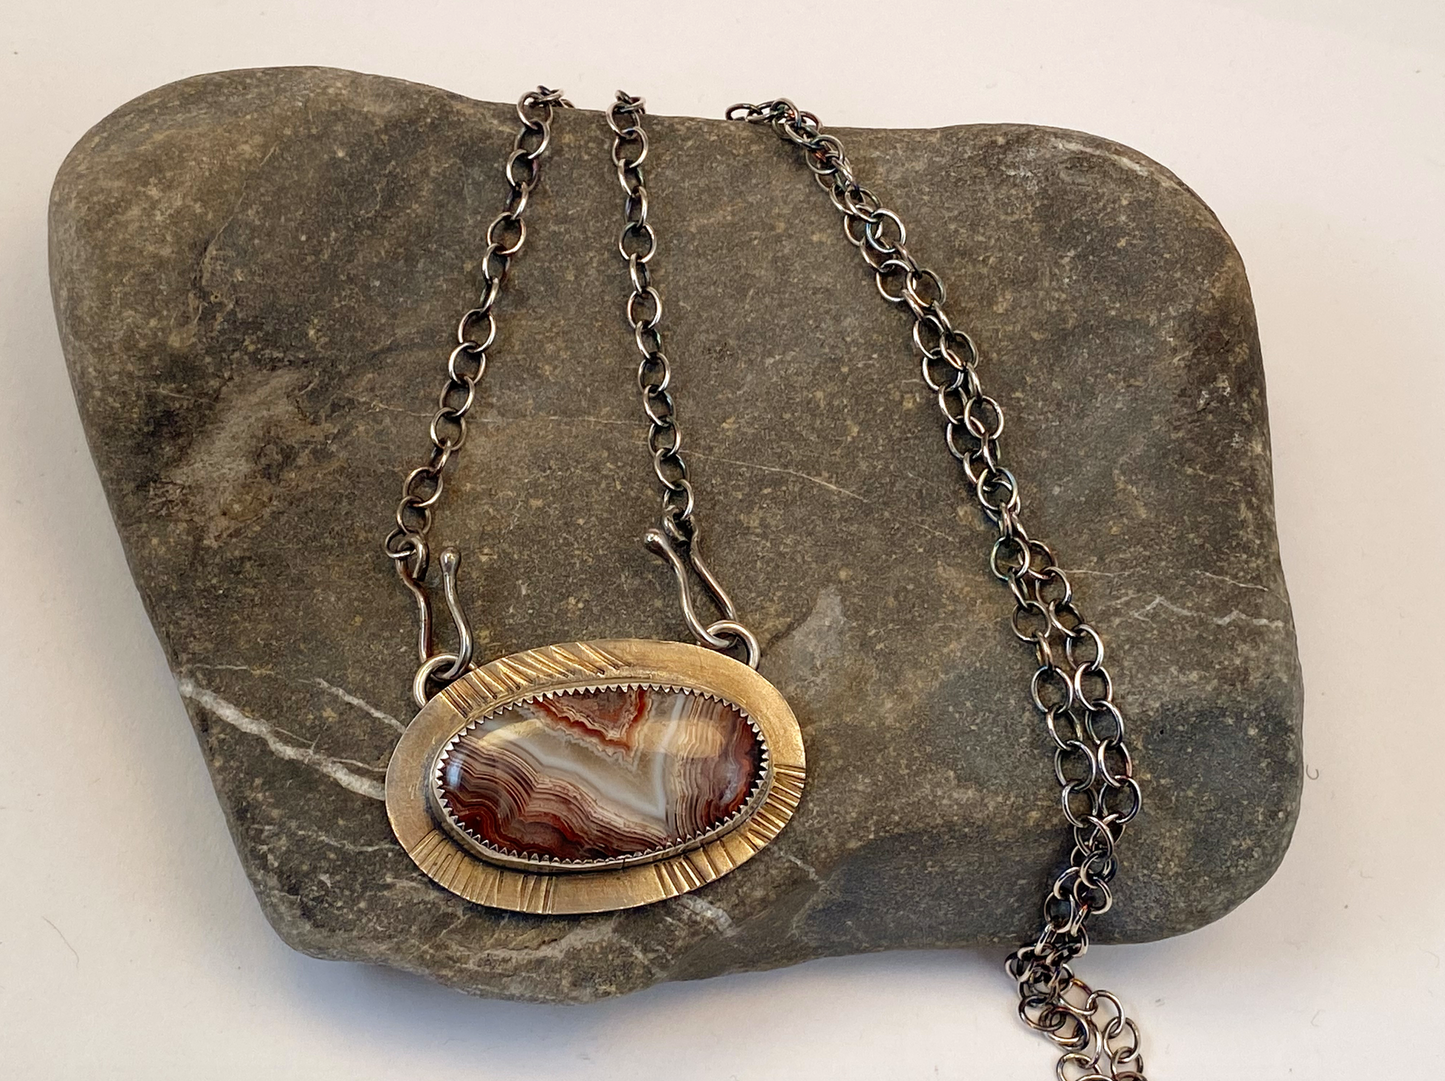 Crazy lace agate with beautiful red, white and gray colors graces this one-of-a-kind necklace.   Set on textured  backplate of sterling silver.  19" sterling silver chain with unique handcrafted clasps that attach in front. Approx. 1” tall 2” wide.  Style: rustic, boho, funky, organic, earthy, natural